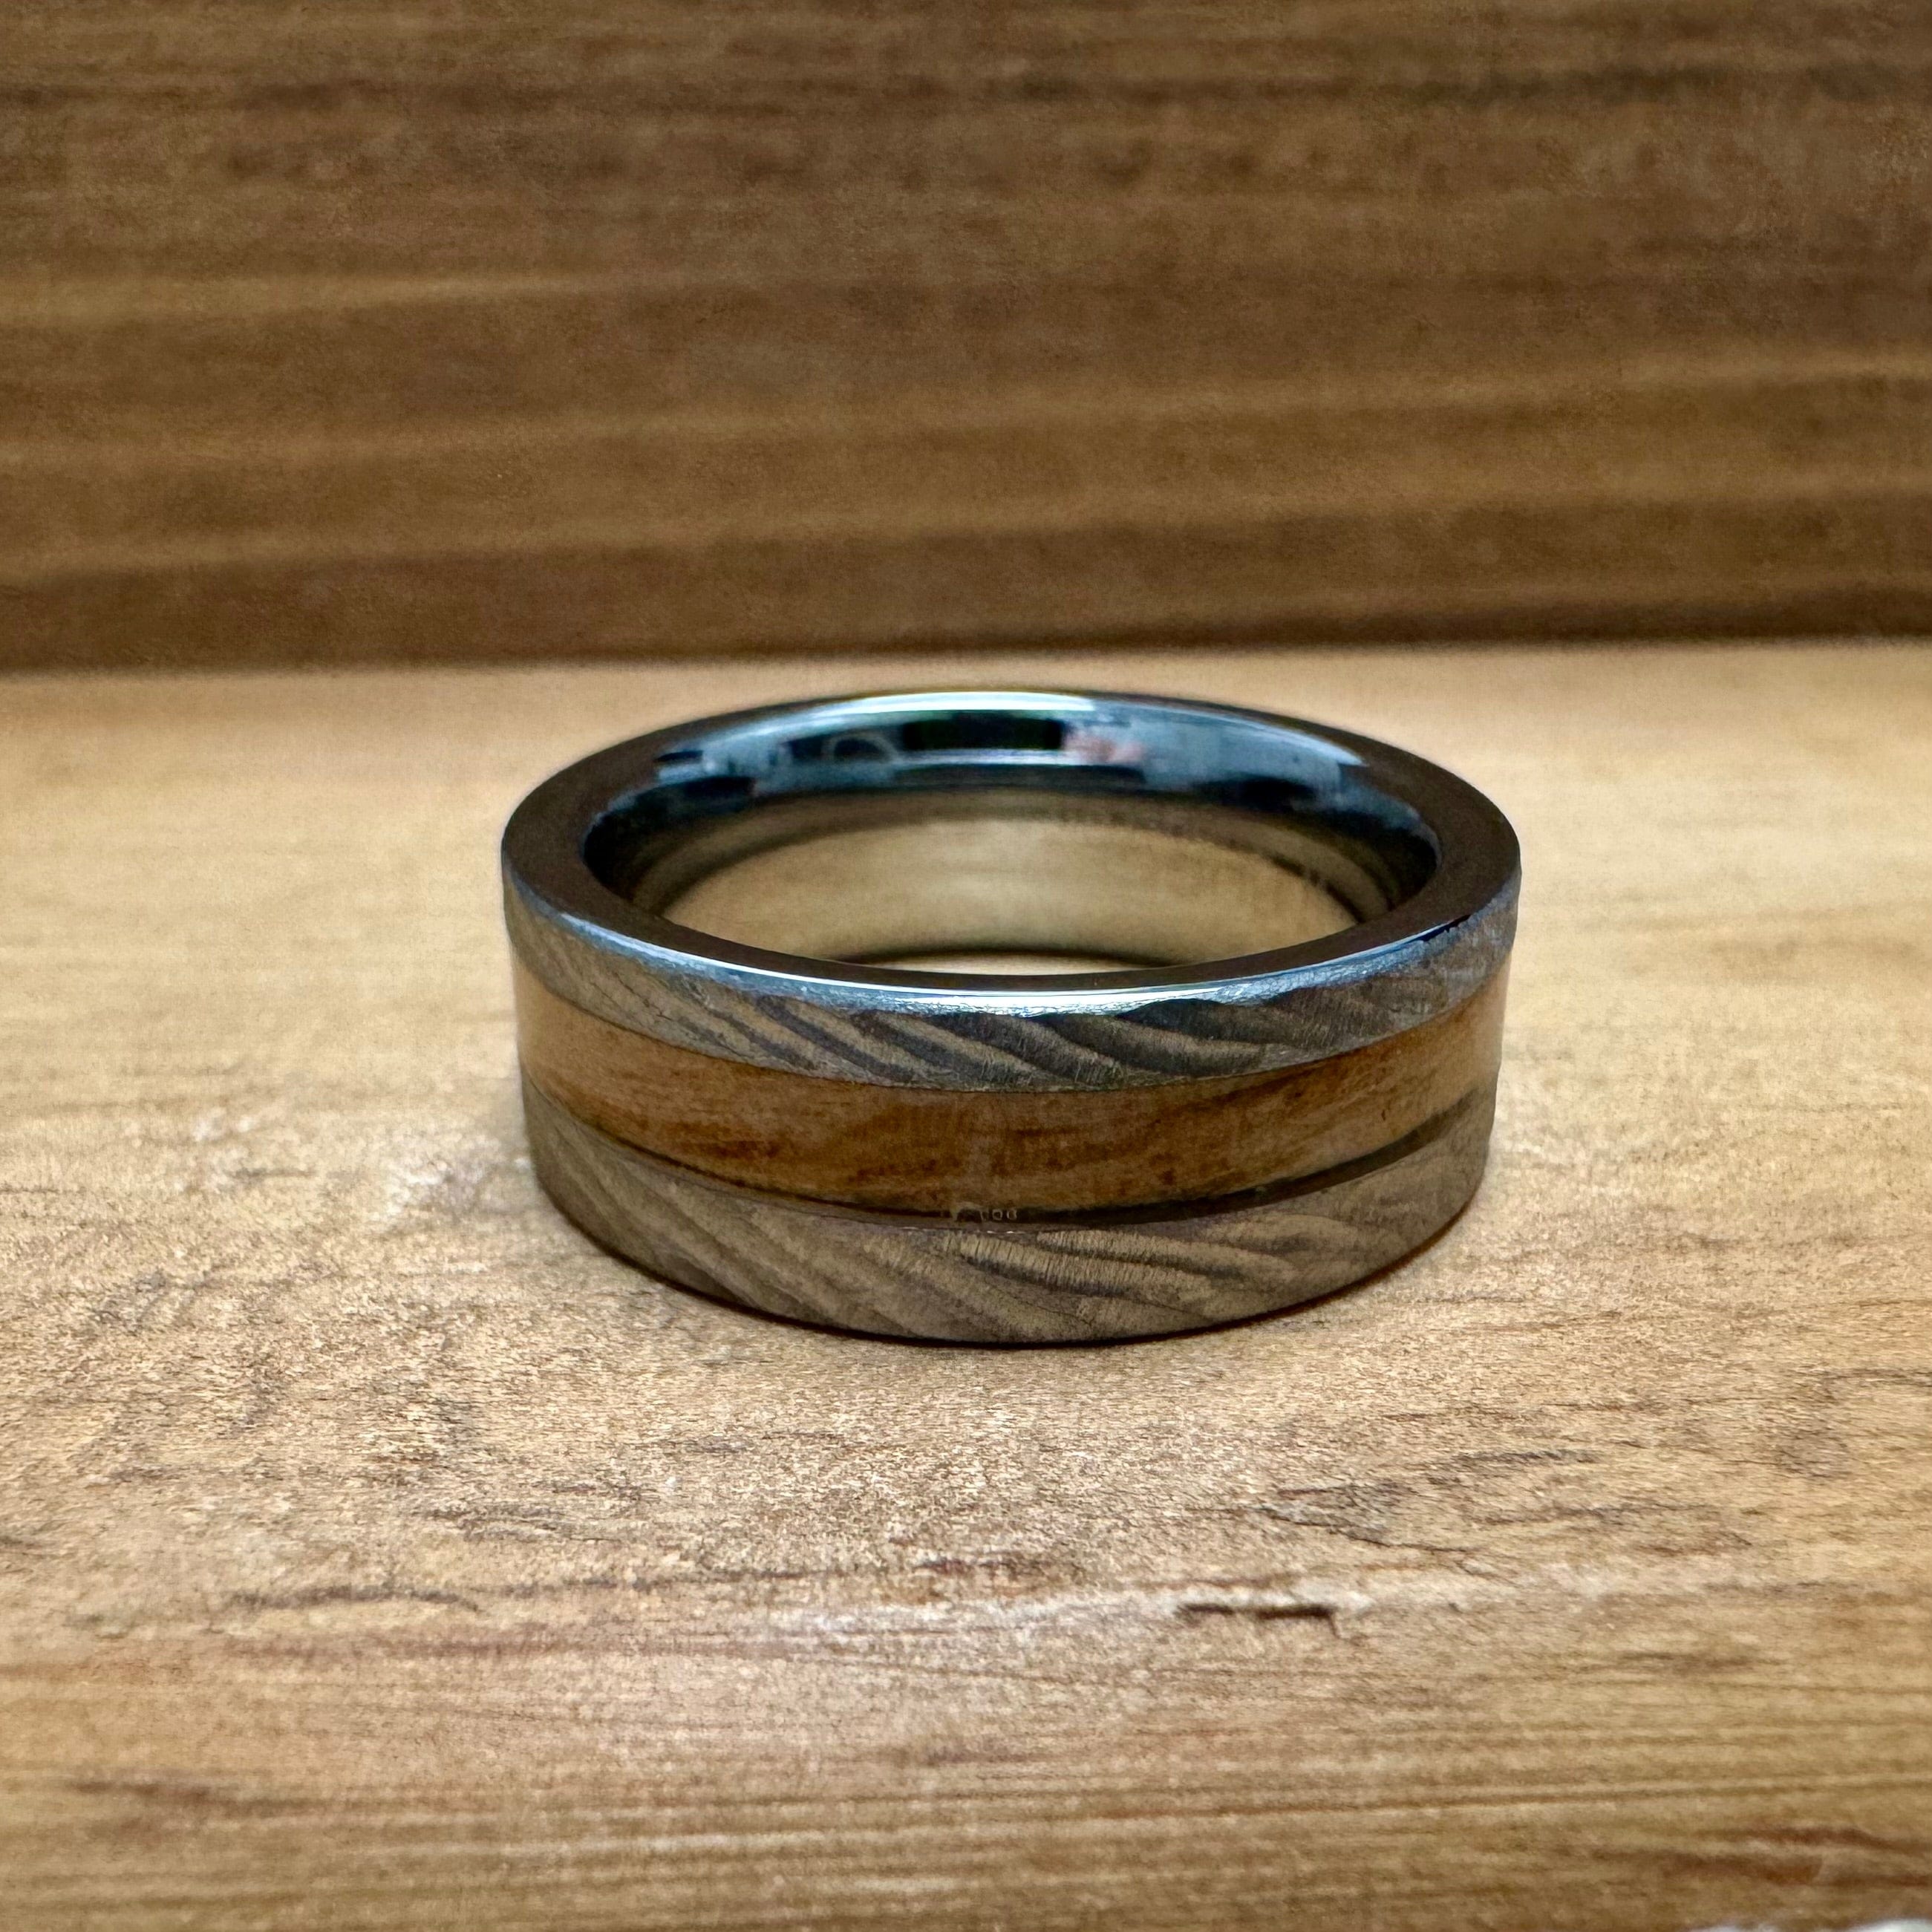 BW James Jewelers ALT Wedding Band “Rugged Old Ironsides" 100% USA Made Rugged Tungsten Ring With Wood From USS Constitution Ship